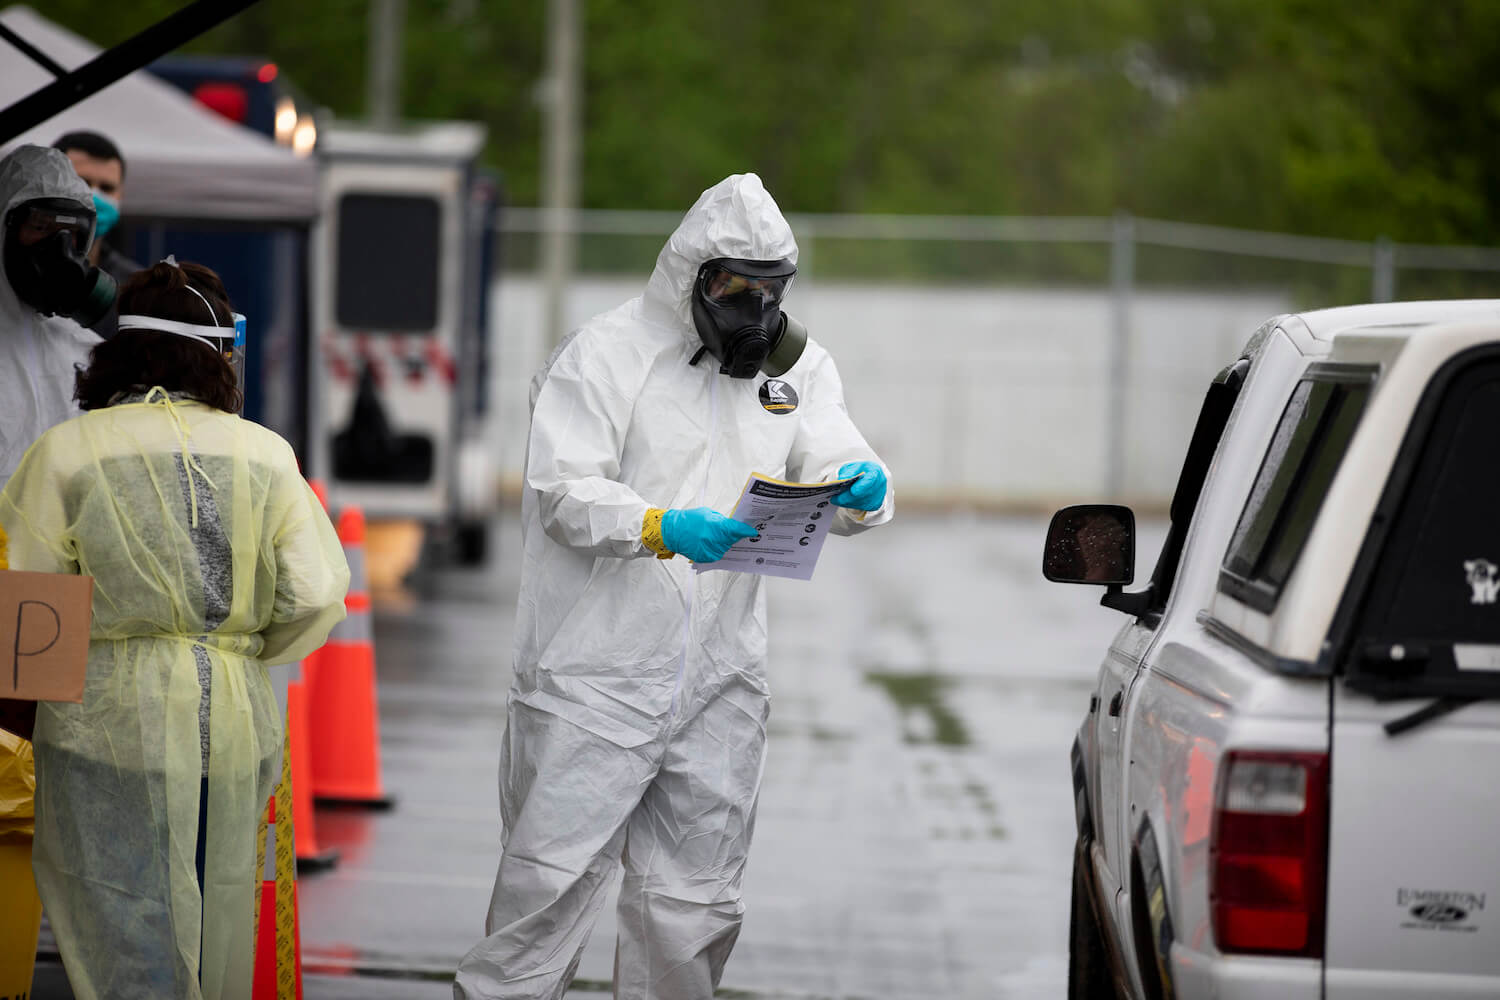 A health worker wearing a hazmat suit conducts a covid-19 test in a drive-thru testing site. August 2020